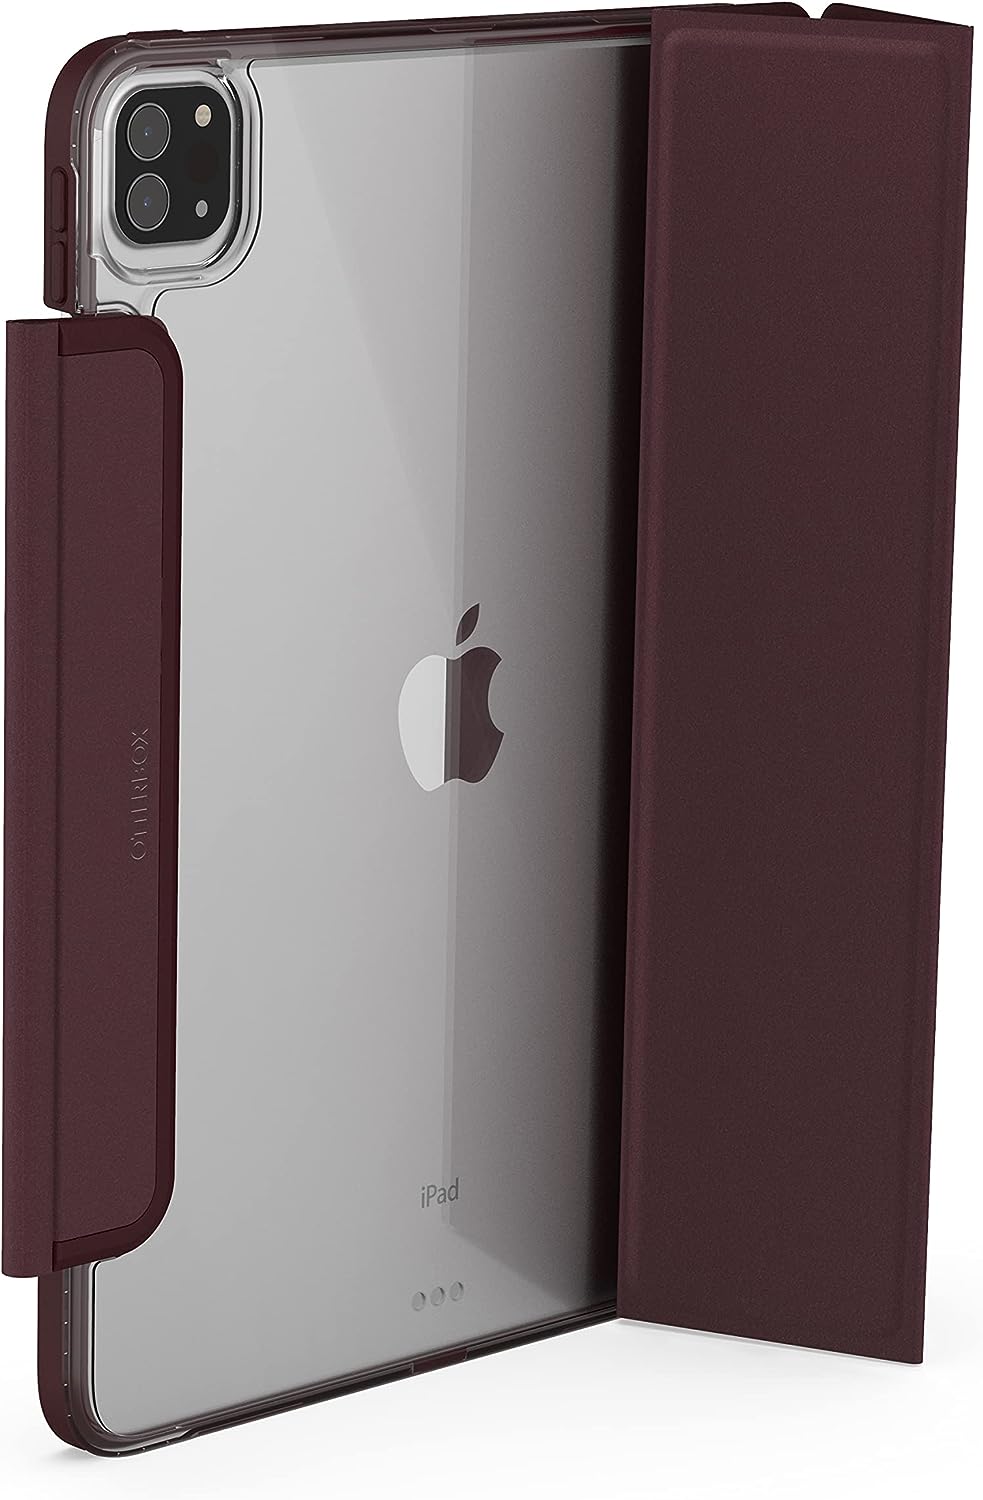 OtterBox SYMMETRY SERIES Case for Apple iPad Pro 2 (11in) - Ripe Burgundy (Certified Refurbished)